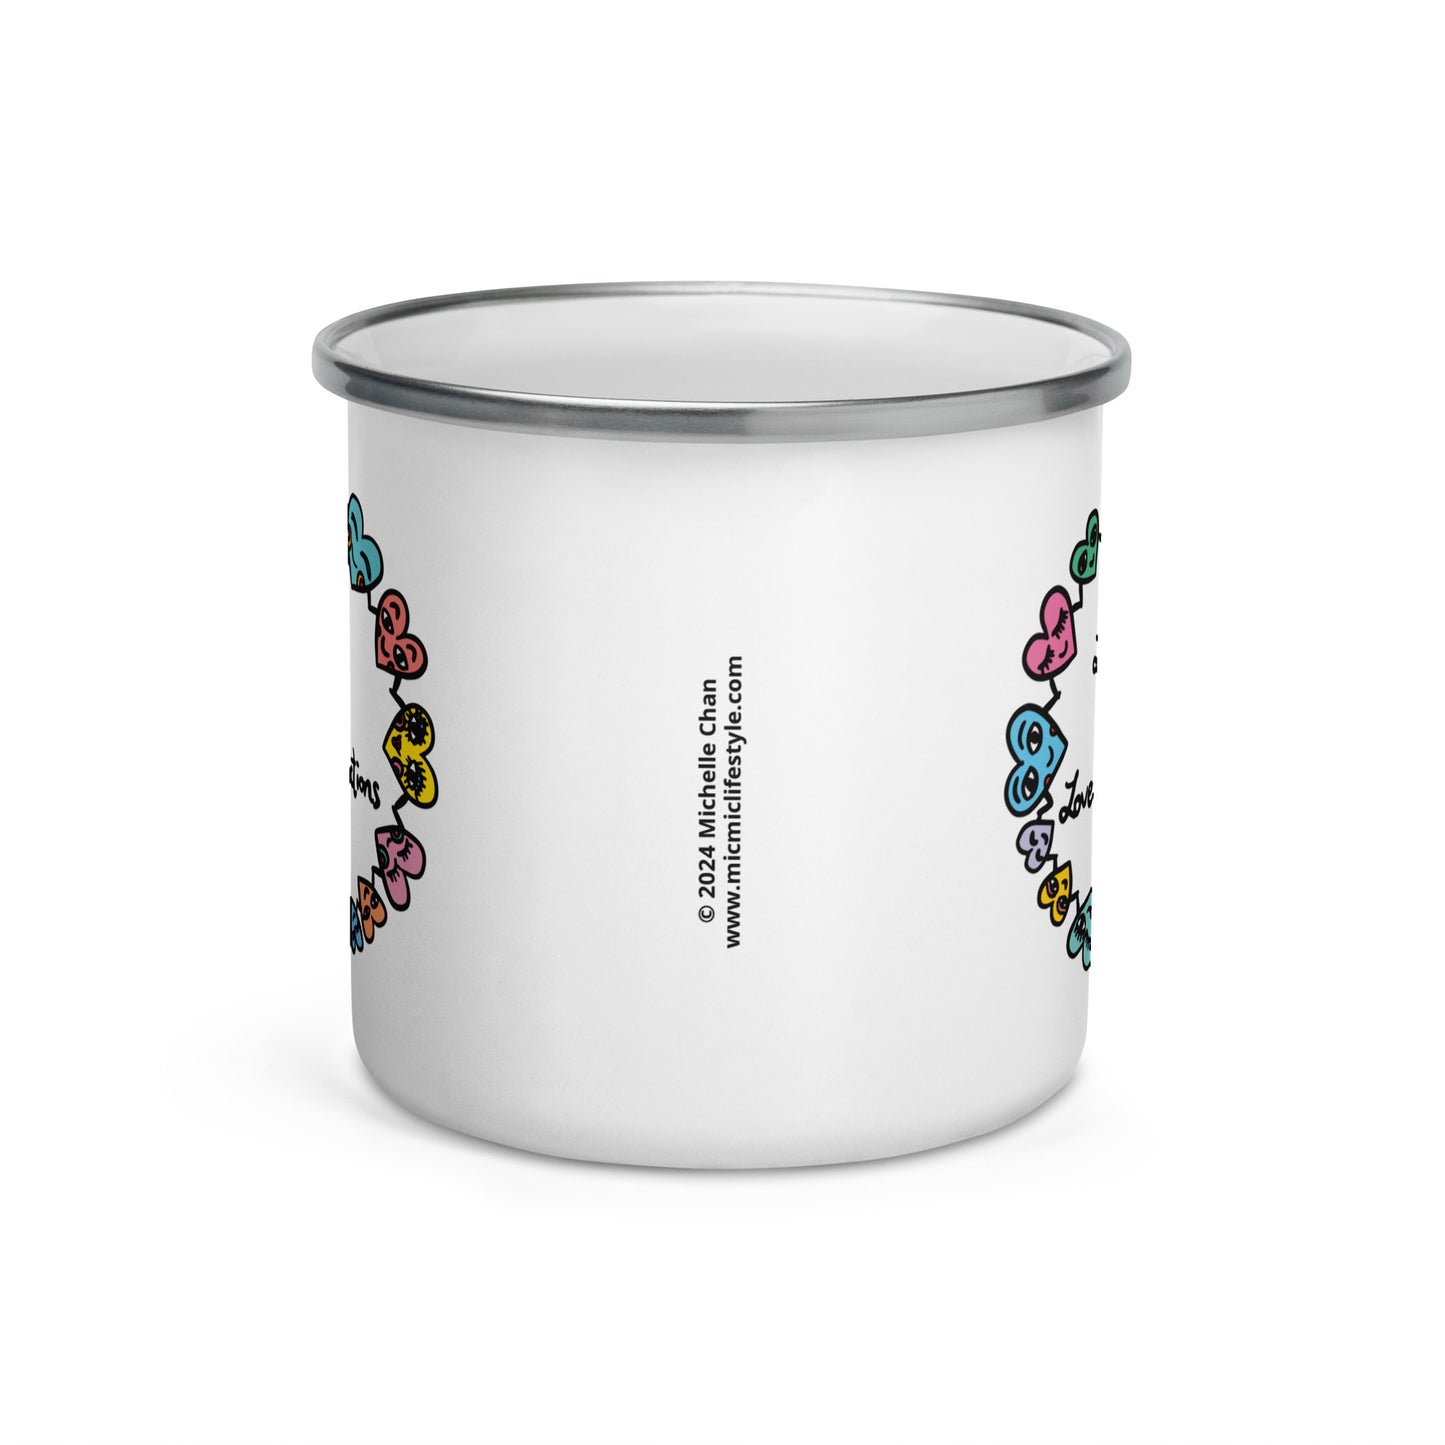 'Life is about Love & Connections" Enamel Mug